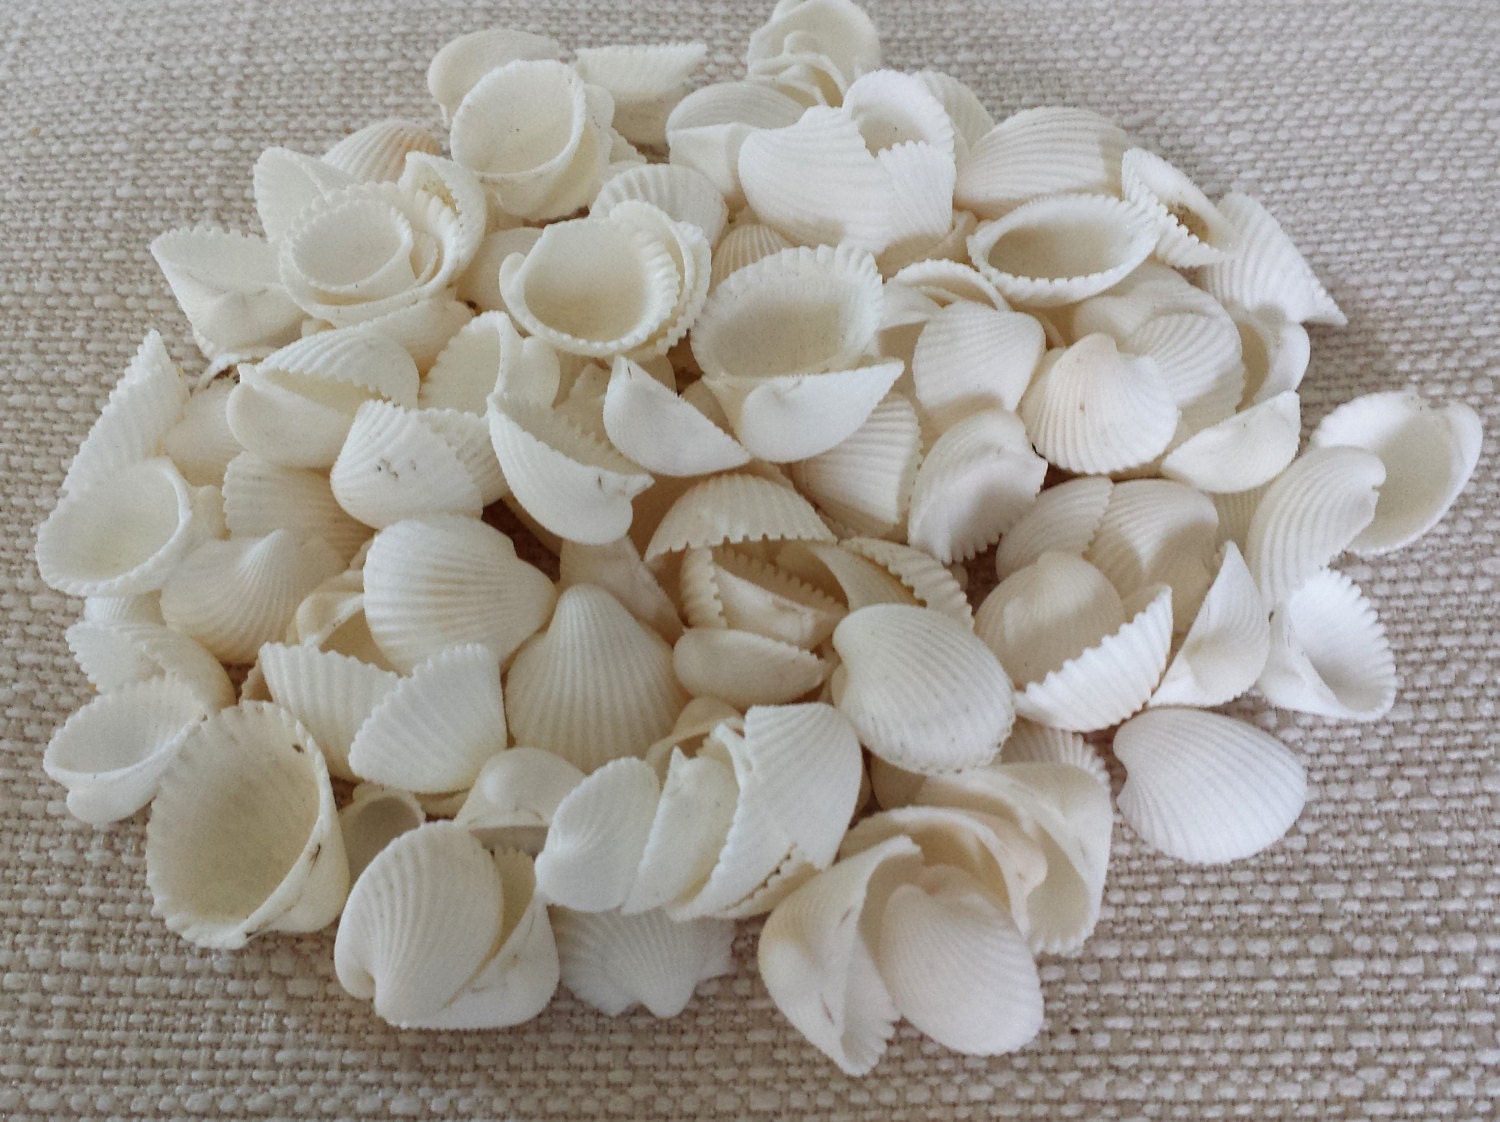 Miniature Conch Shells Little Small Teeny Tiny Light Patterned 